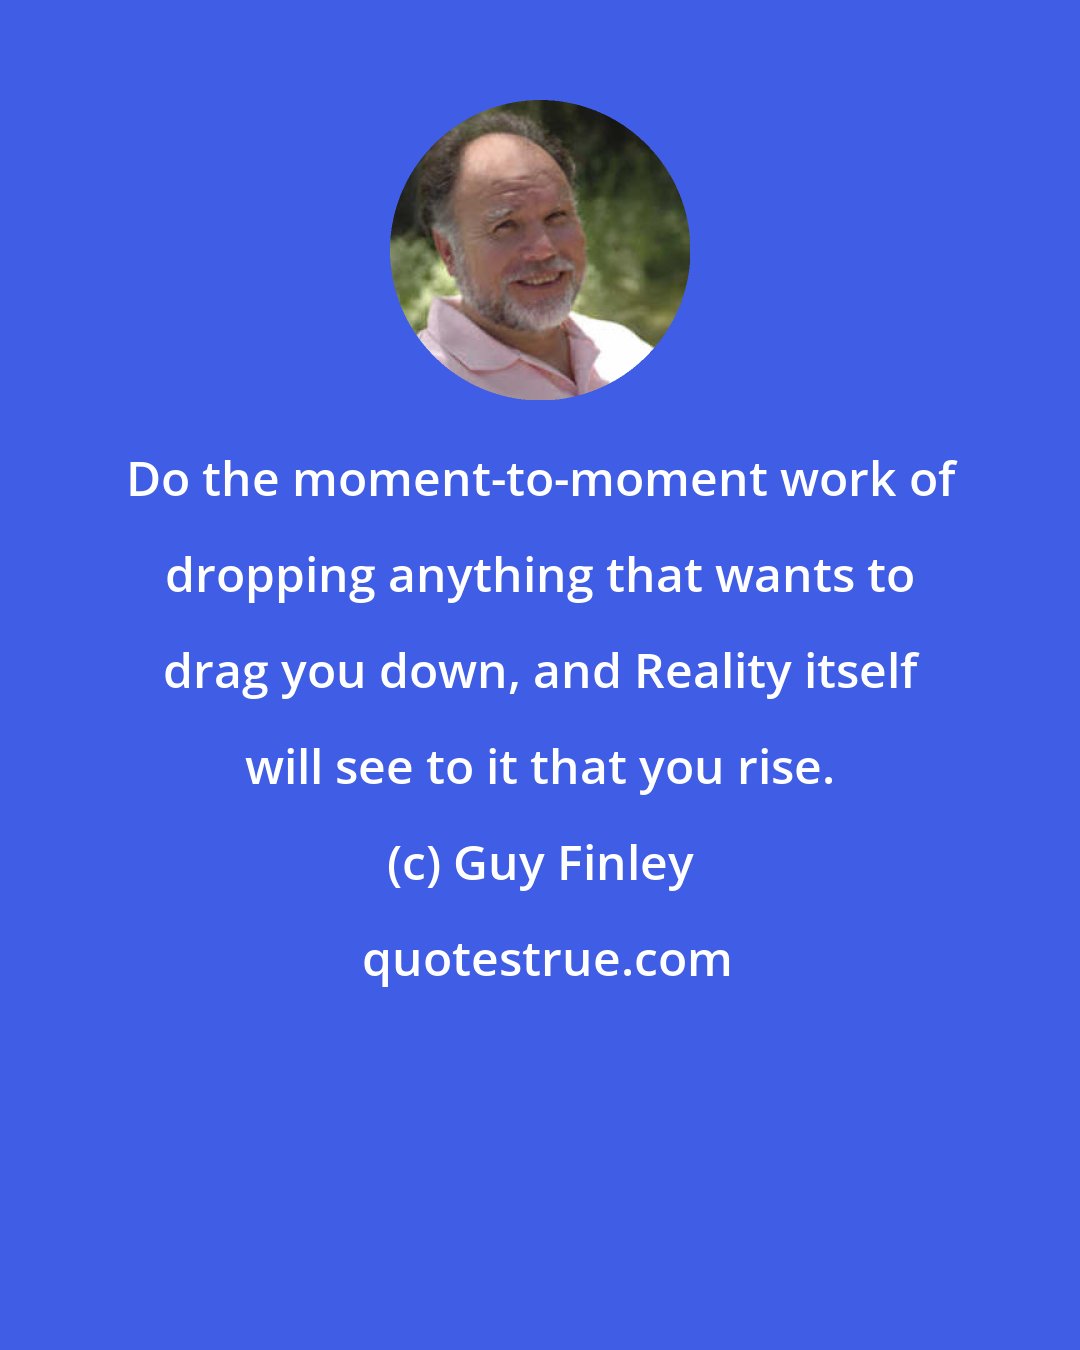 Guy Finley: Do the moment-to-moment work of dropping anything that wants to drag you down, and Reality itself will see to it that you rise.